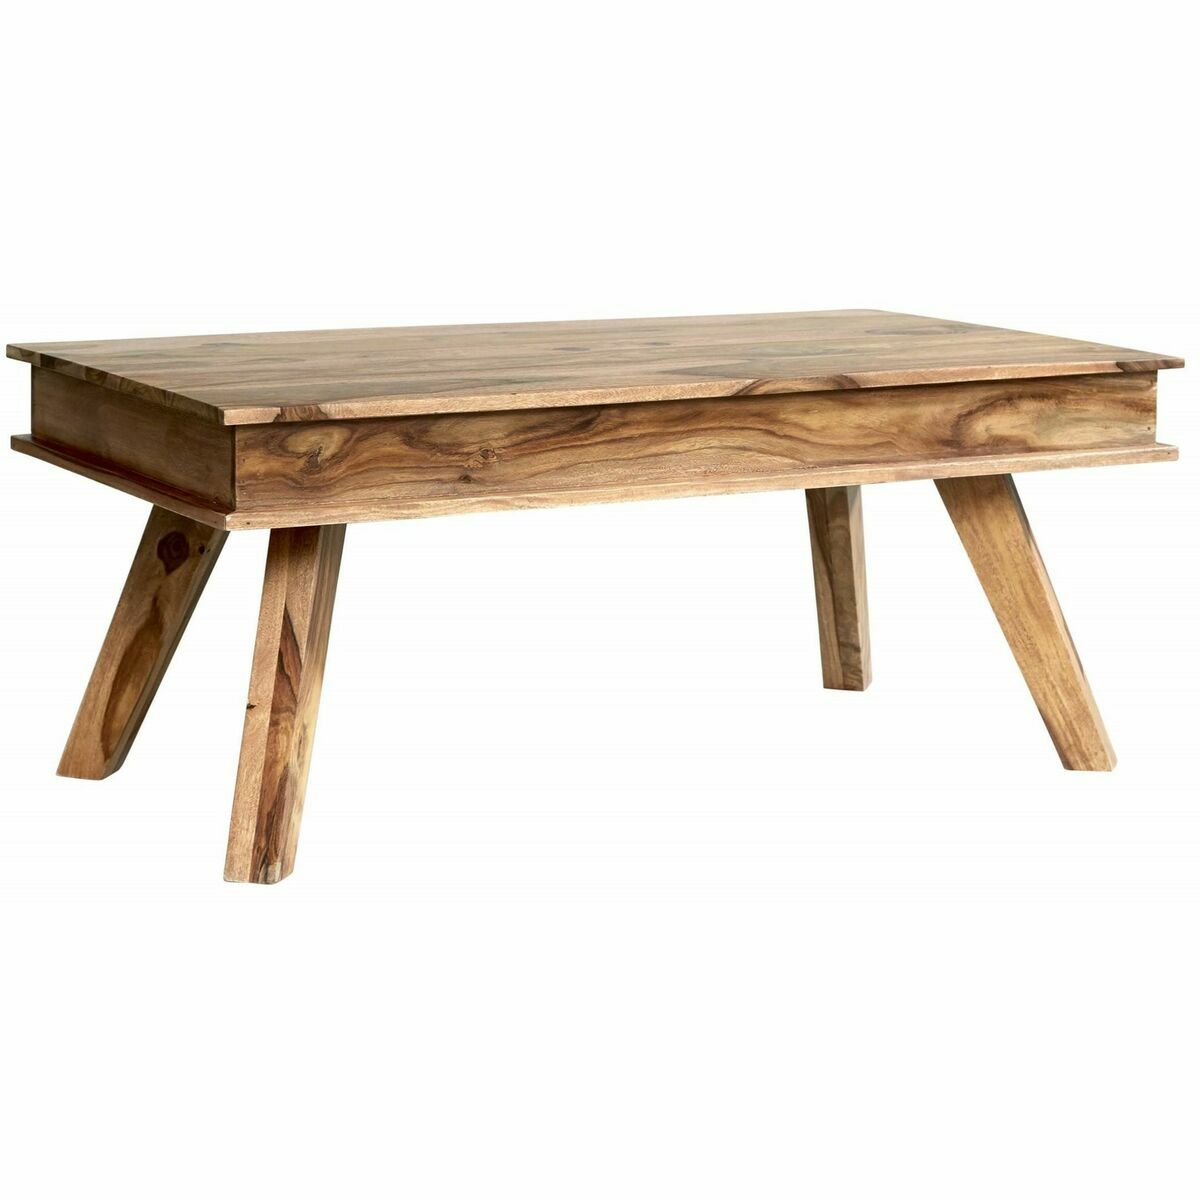 Centre Table in Wood (140 x 40 x 45 cm)